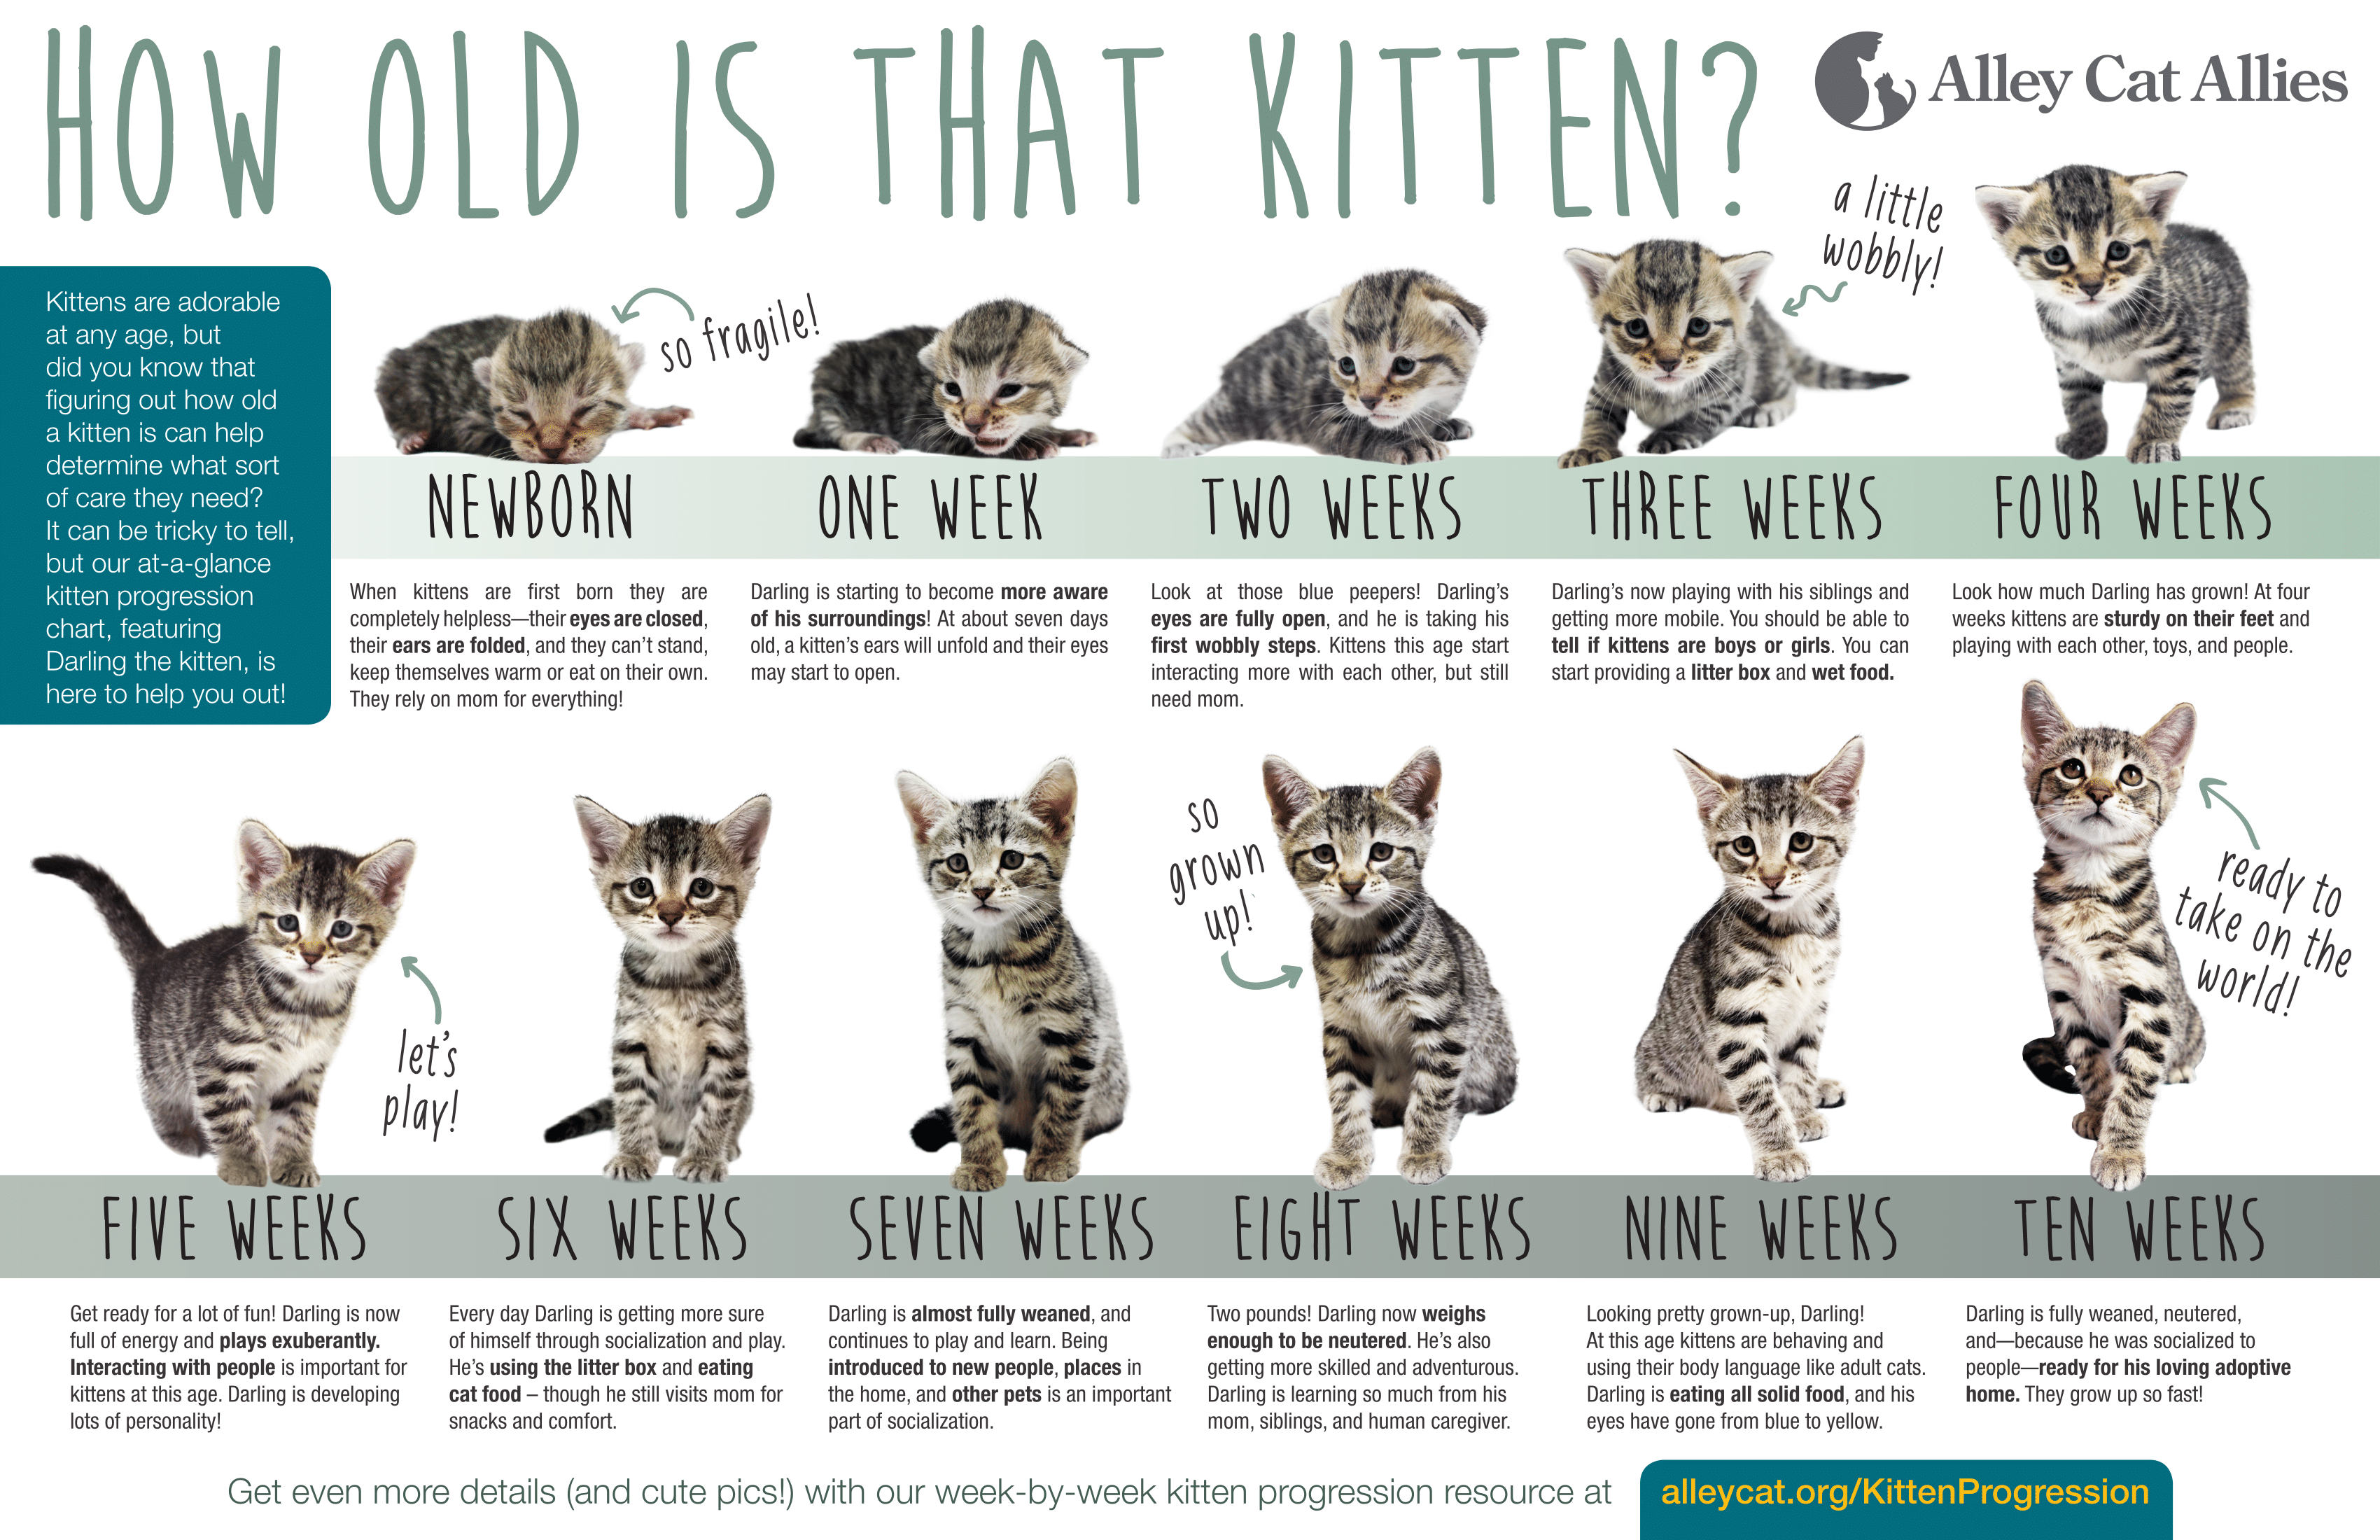 What to do if you find a stray cat 